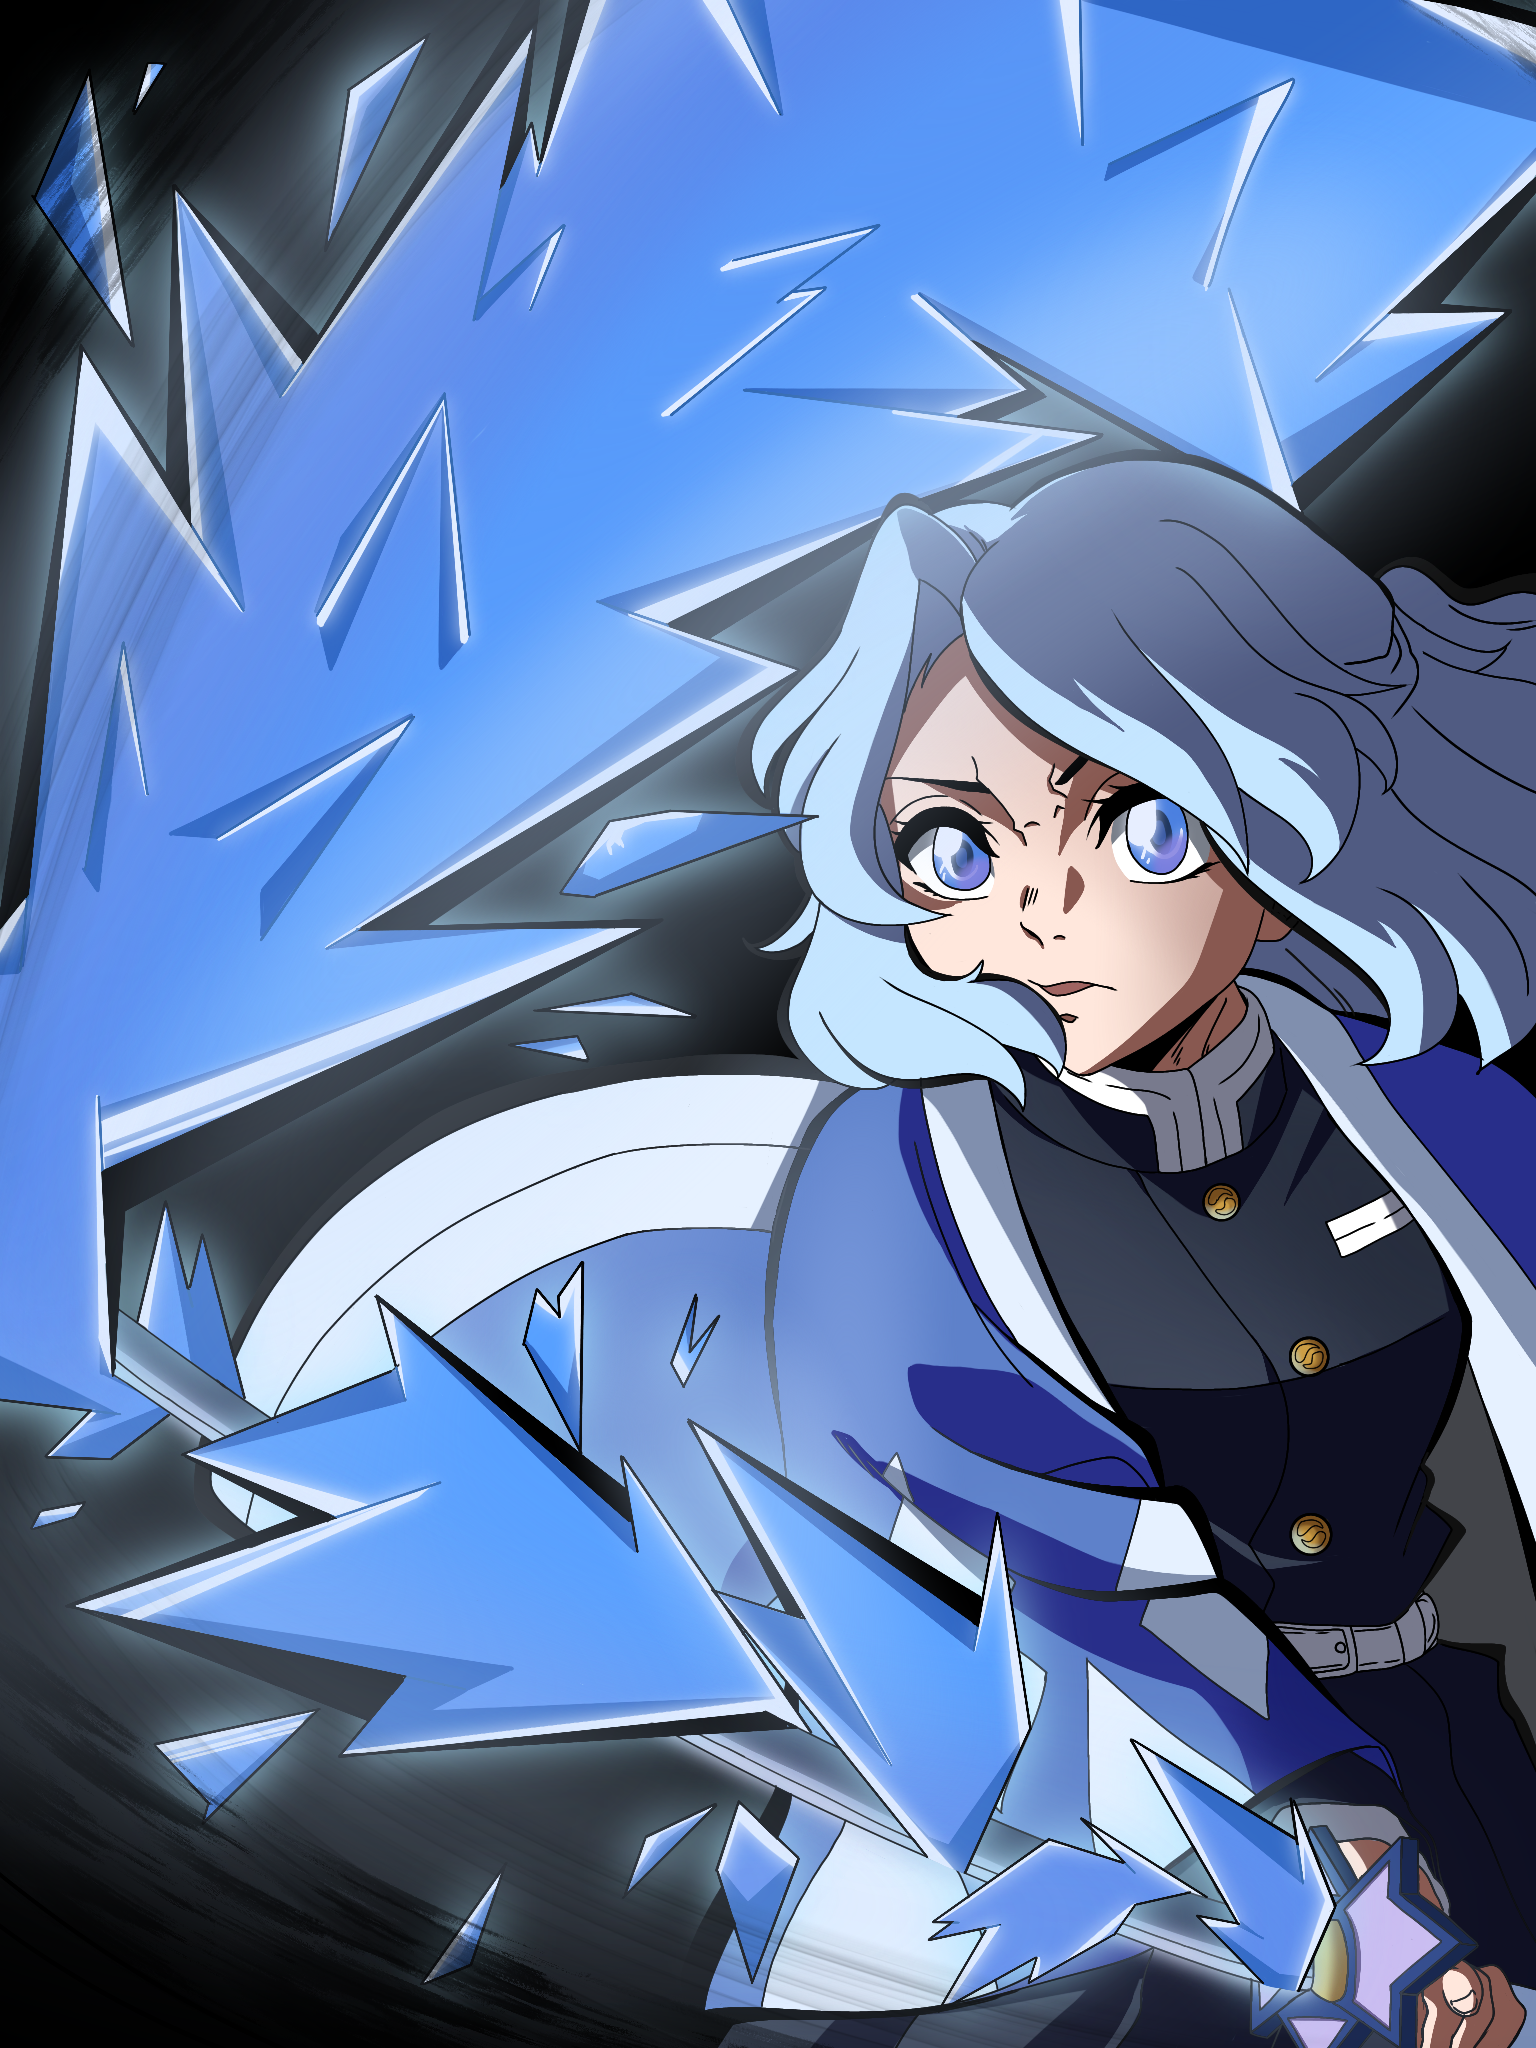 Lexica - Animeboy,anime,quiet boy, has the power of ice, white hair, ice  blue eyes, in class alone, Japanese style